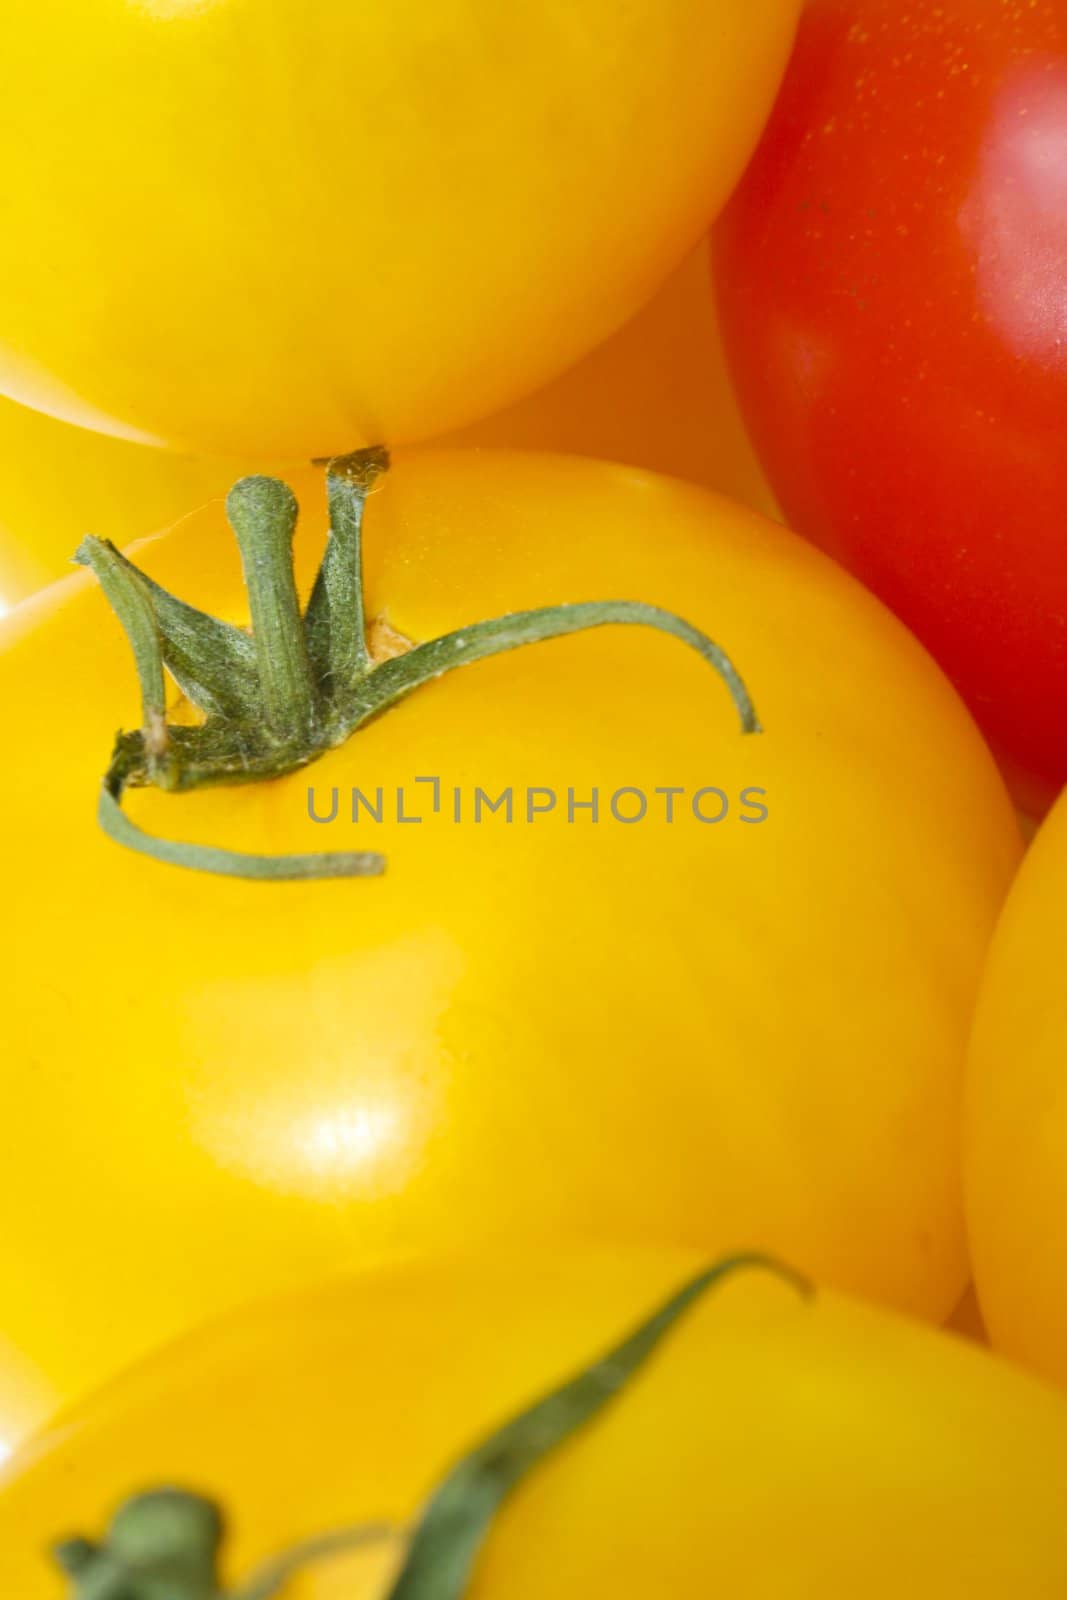 Close-up of yellow and red tomatoes